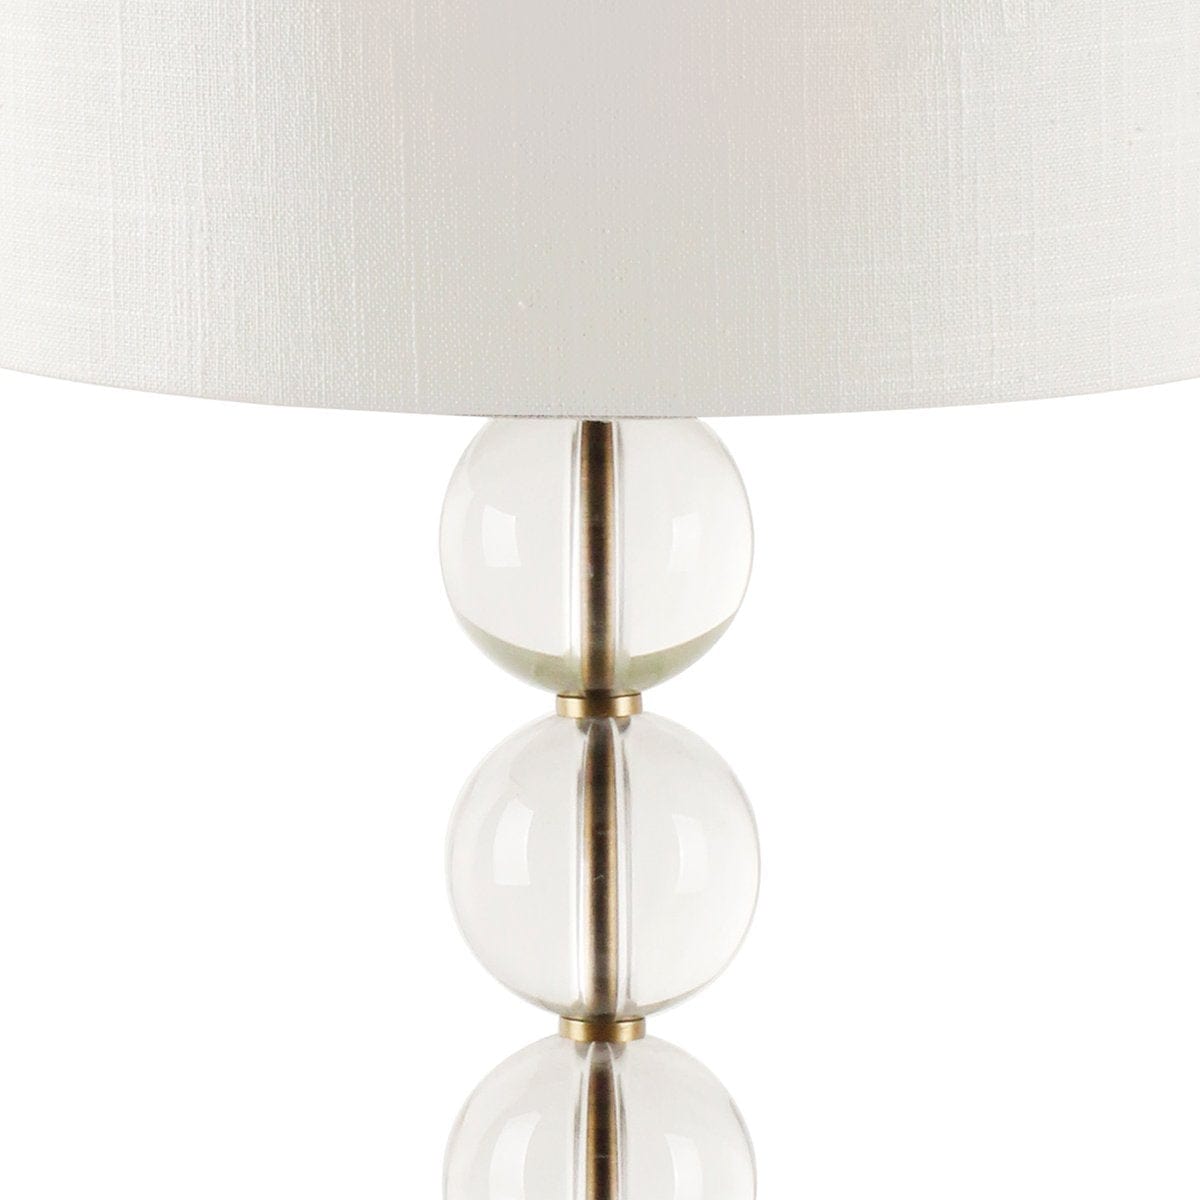 CAFE LIGHTING & LIVING Table Lamp Chanel Crystal Table Lamp 11759